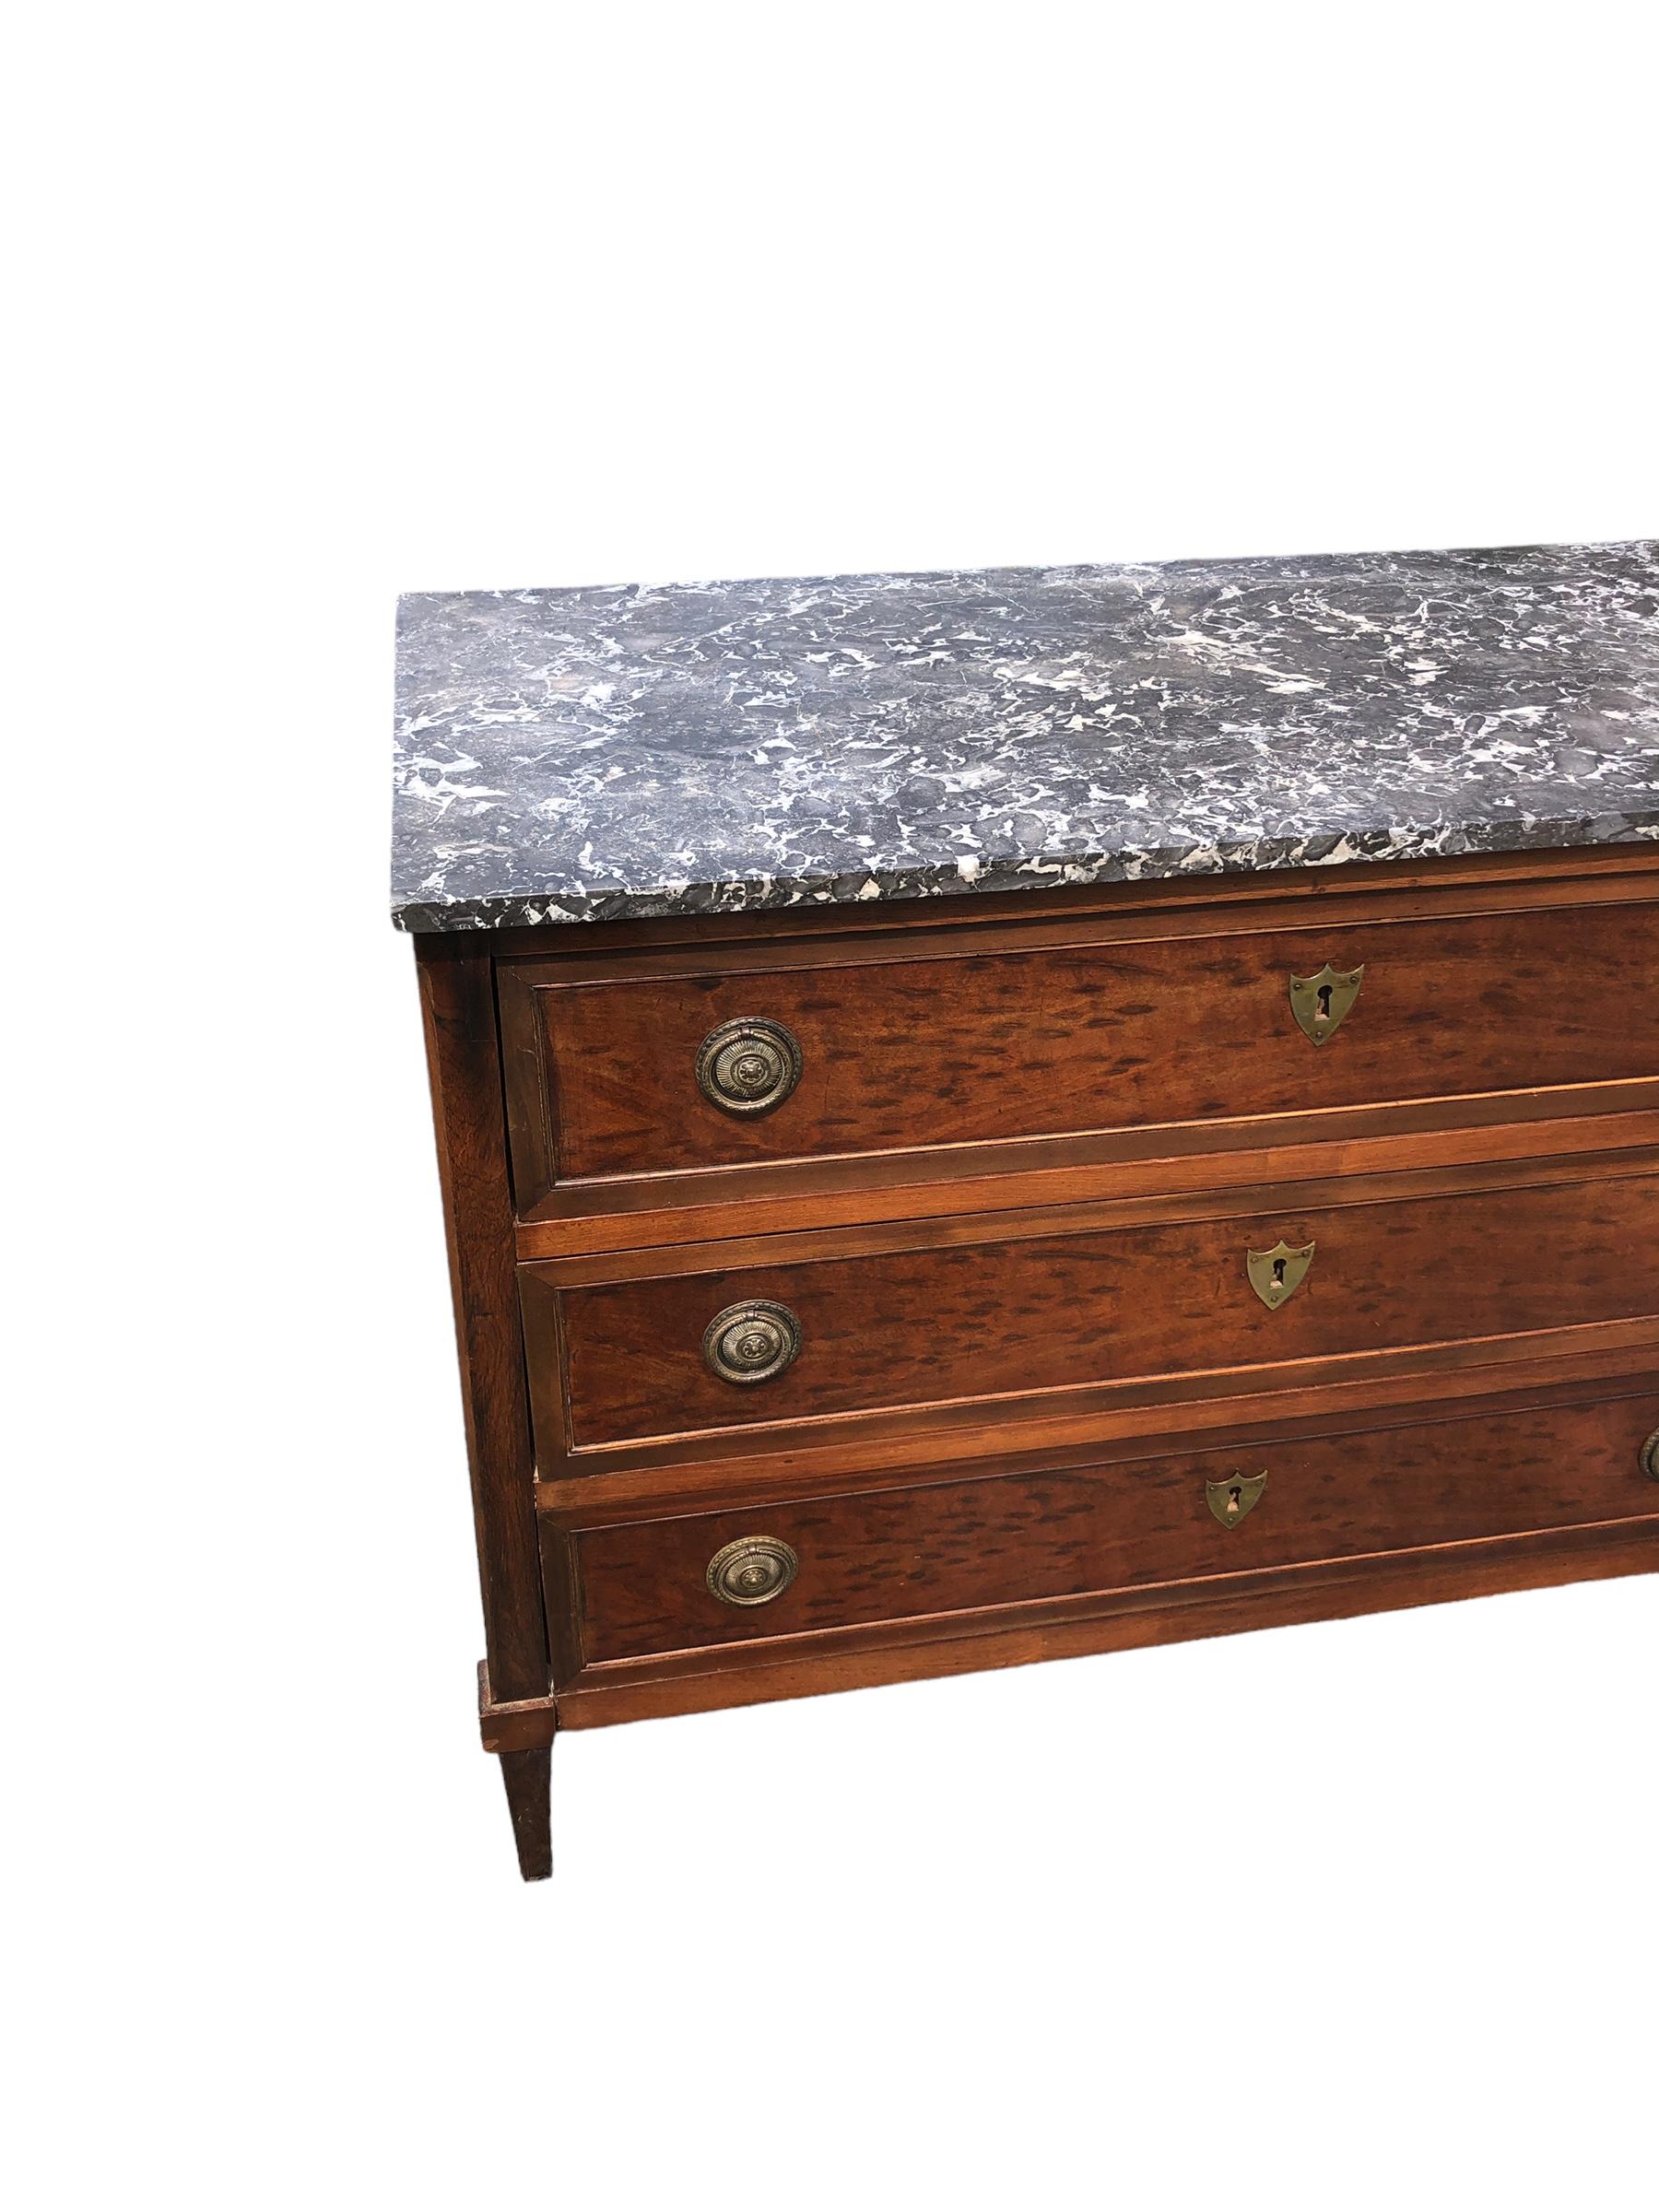 19th Century Louis XVI Style Marble Top Plum Pudding Mahogany Chest For Sale 6